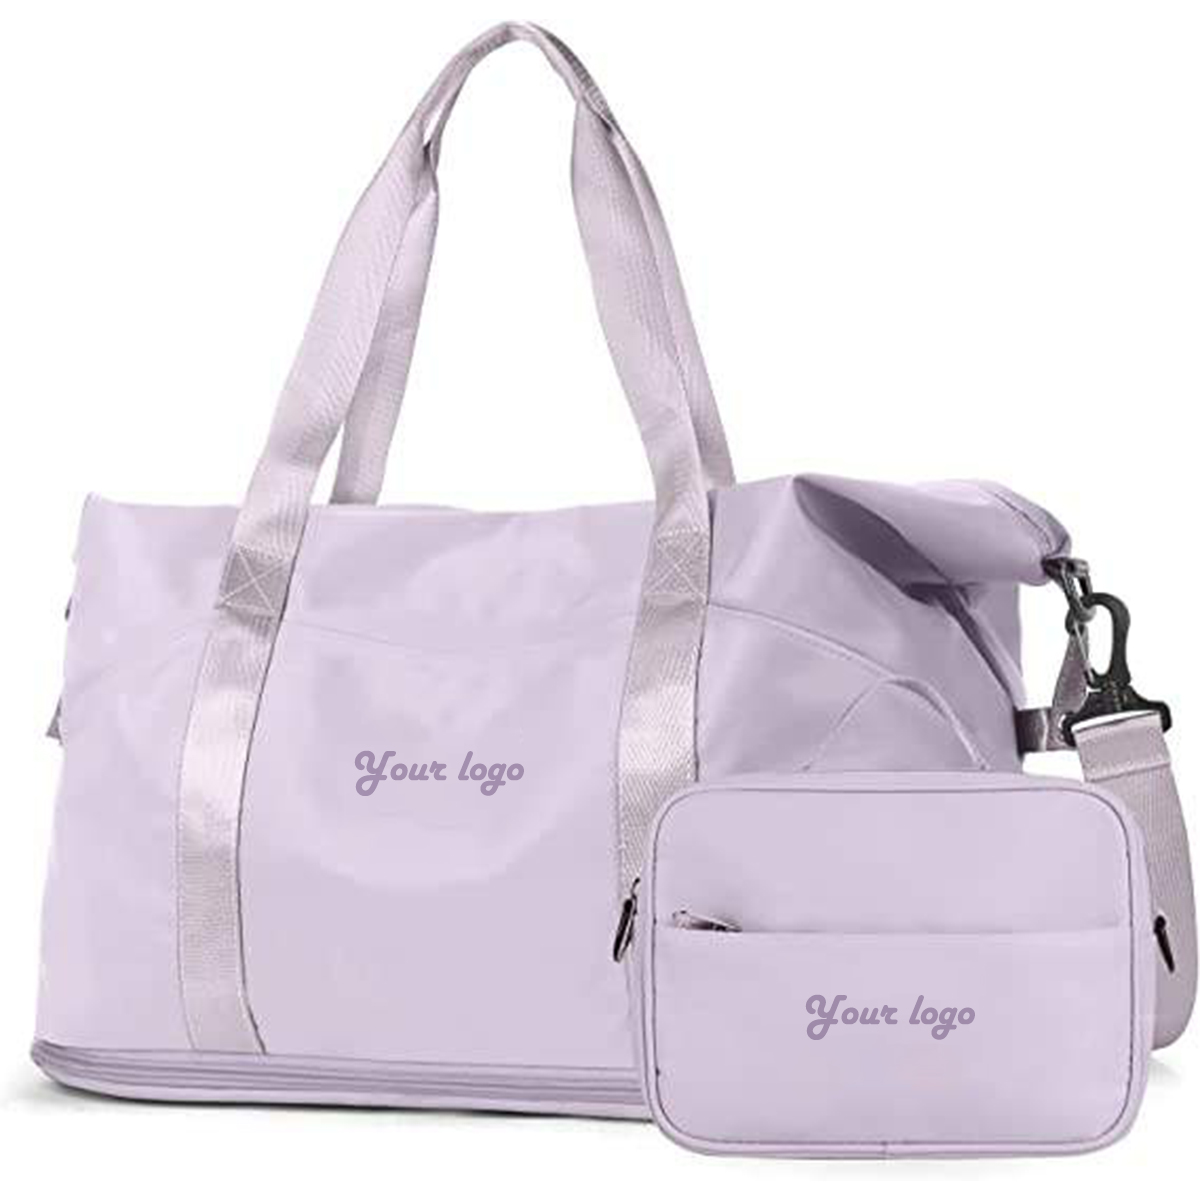 Women Gym Wholesales Toiletry Travel Personalized Duffle Bag sets